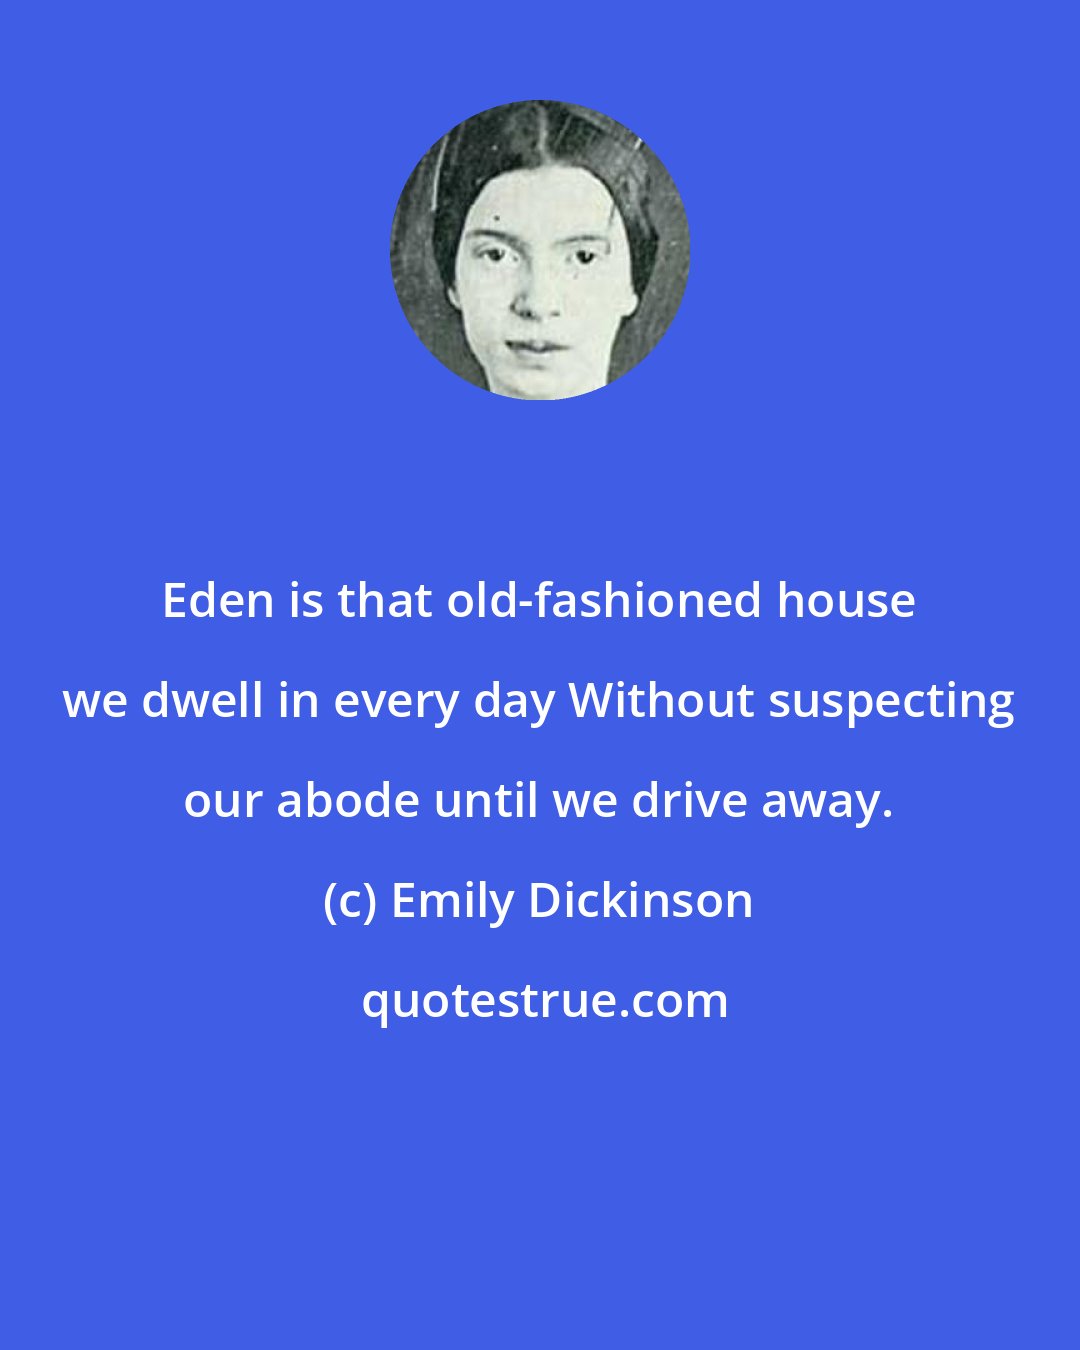 Emily Dickinson: Eden is that old-fashioned house we dwell in every day Without suspecting our abode until we drive away.